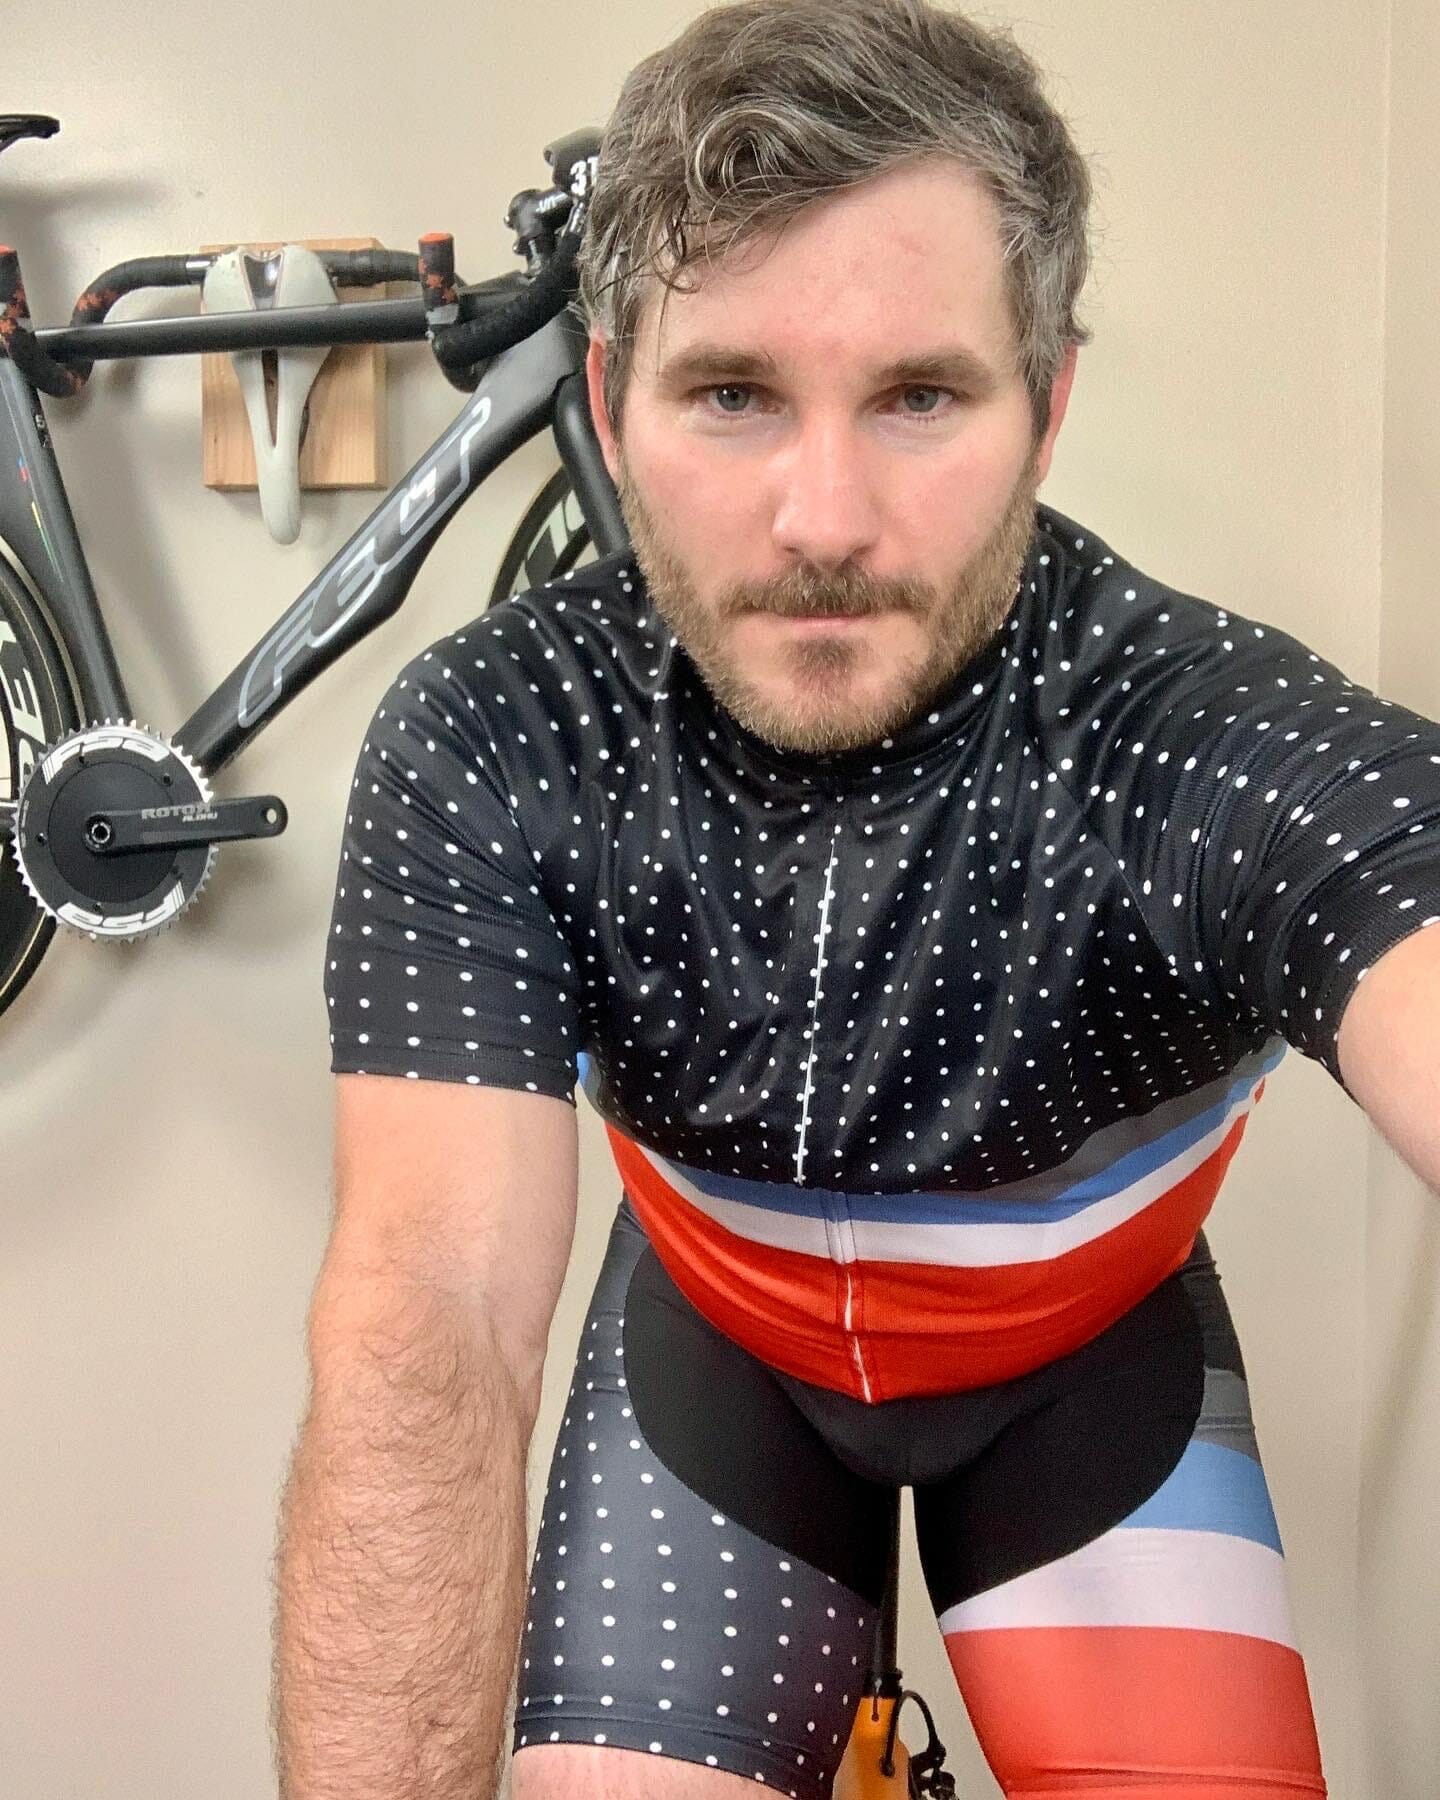 Wearing the kit on the trainer